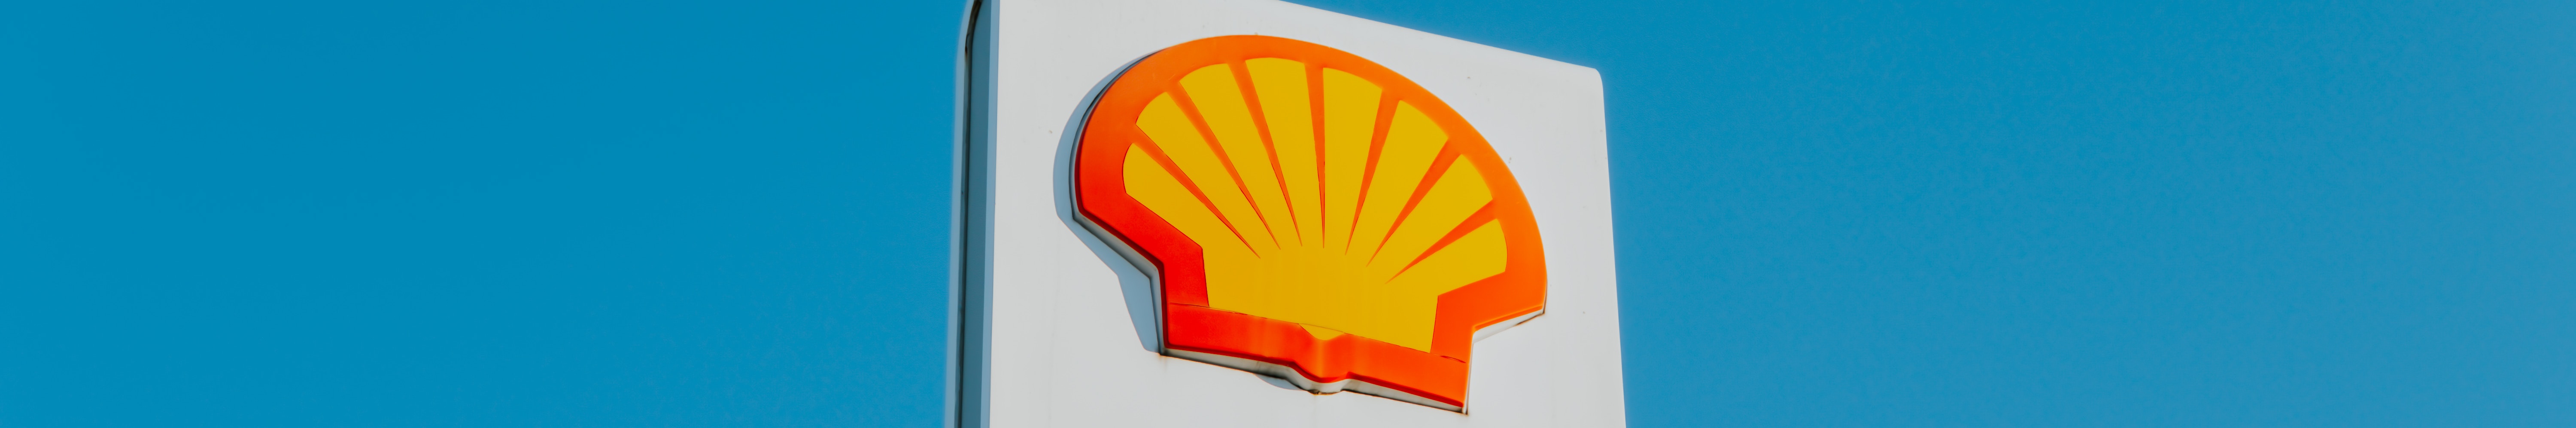 Shell has a long poor track in the Niger Delta and current oil spill events that pollute water